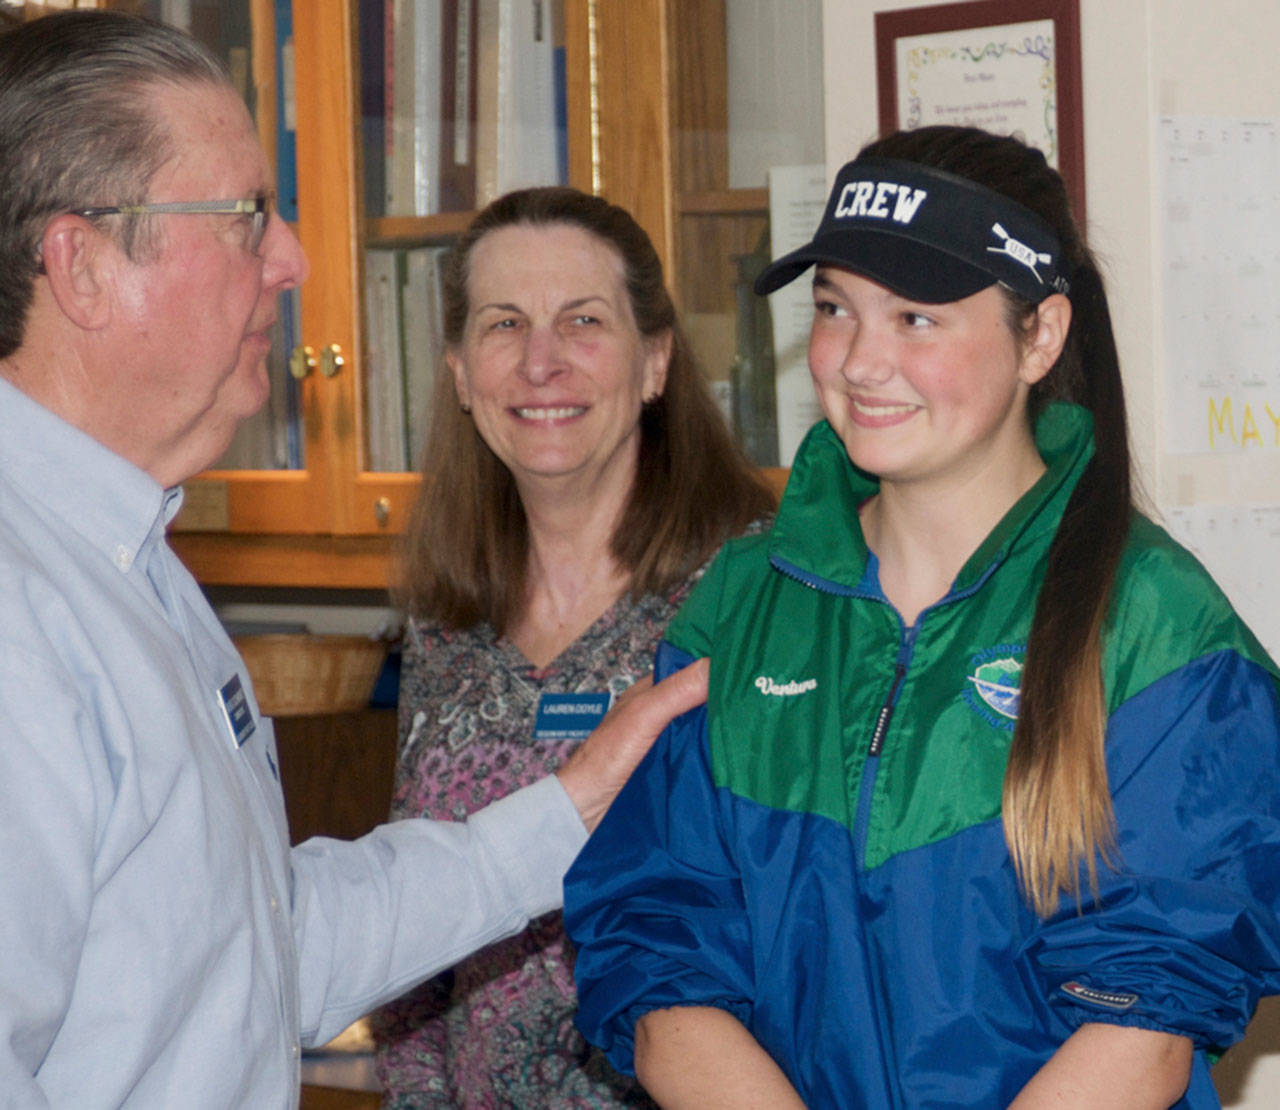 Sequim Bay Yacht Club members are helping Port Angeles rower Ella Ventura, right, defray her expenses for this summer’s US Rowing Under 17 Olympic Development Program, presenting her with a donation on May 24. Presenting a check for $625 on May 24 were, from left, yacht club commodore Doug Schwarz and master rower Lauren Doyle. Submitted photo